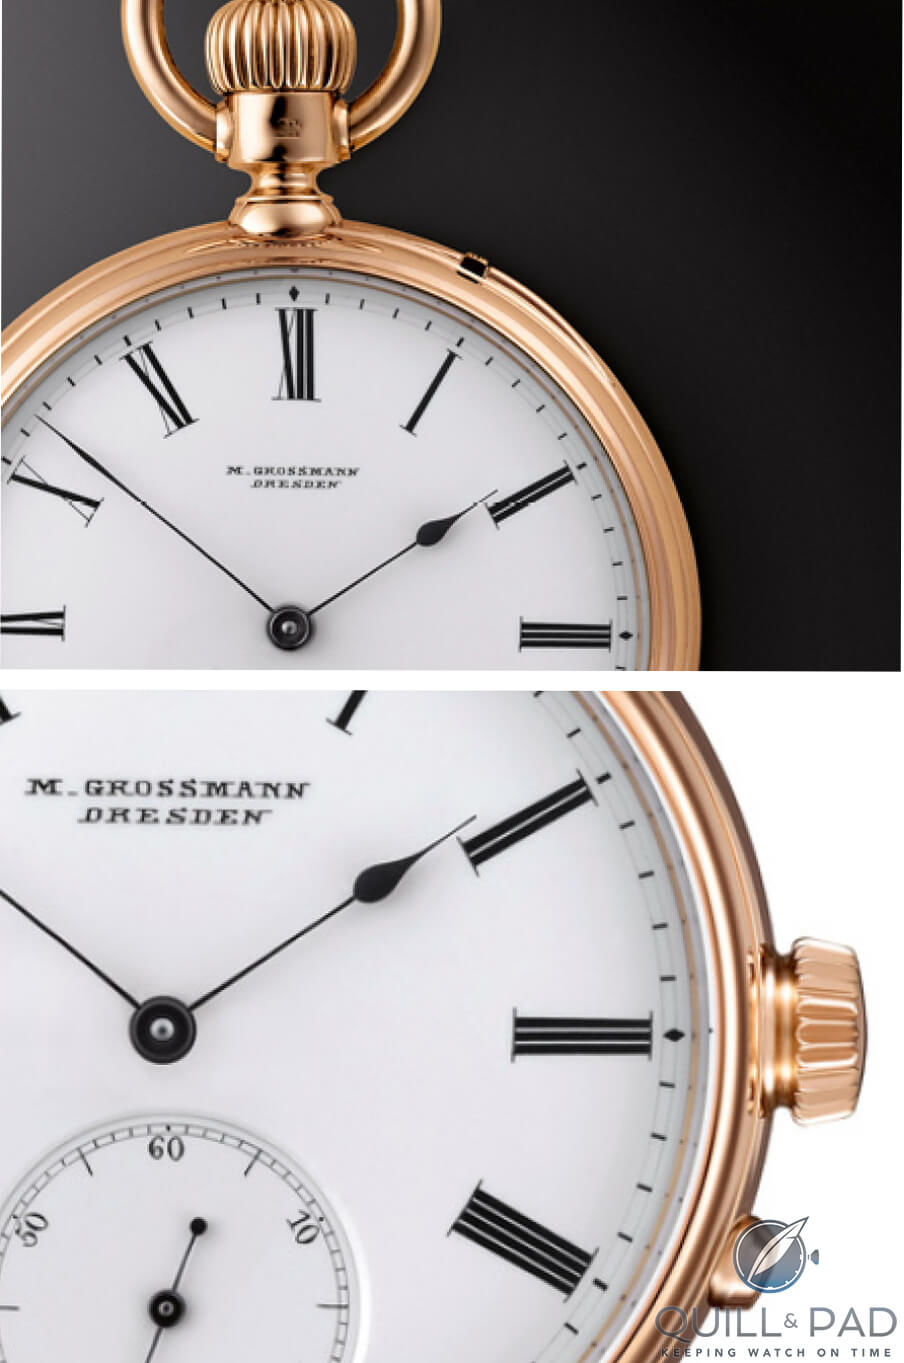 Note the careful replication of the enamel dial, font, chapter ring, and Roman numerals on the modern wristwatch (bottom) as seen on the vintage pocket watch (top)